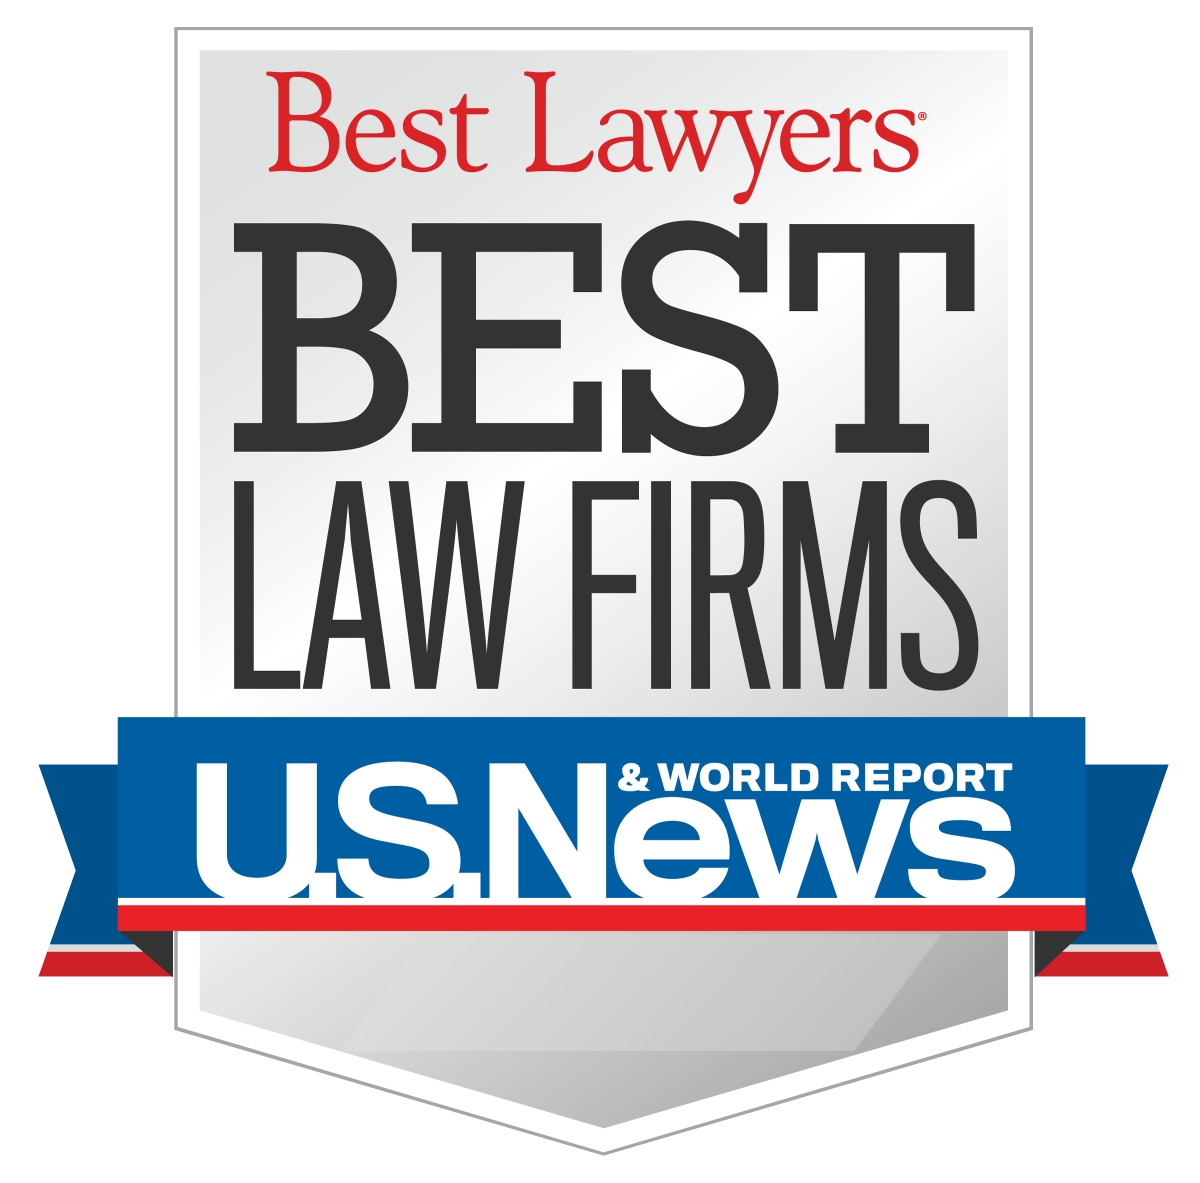 Best Law Firms (US News)